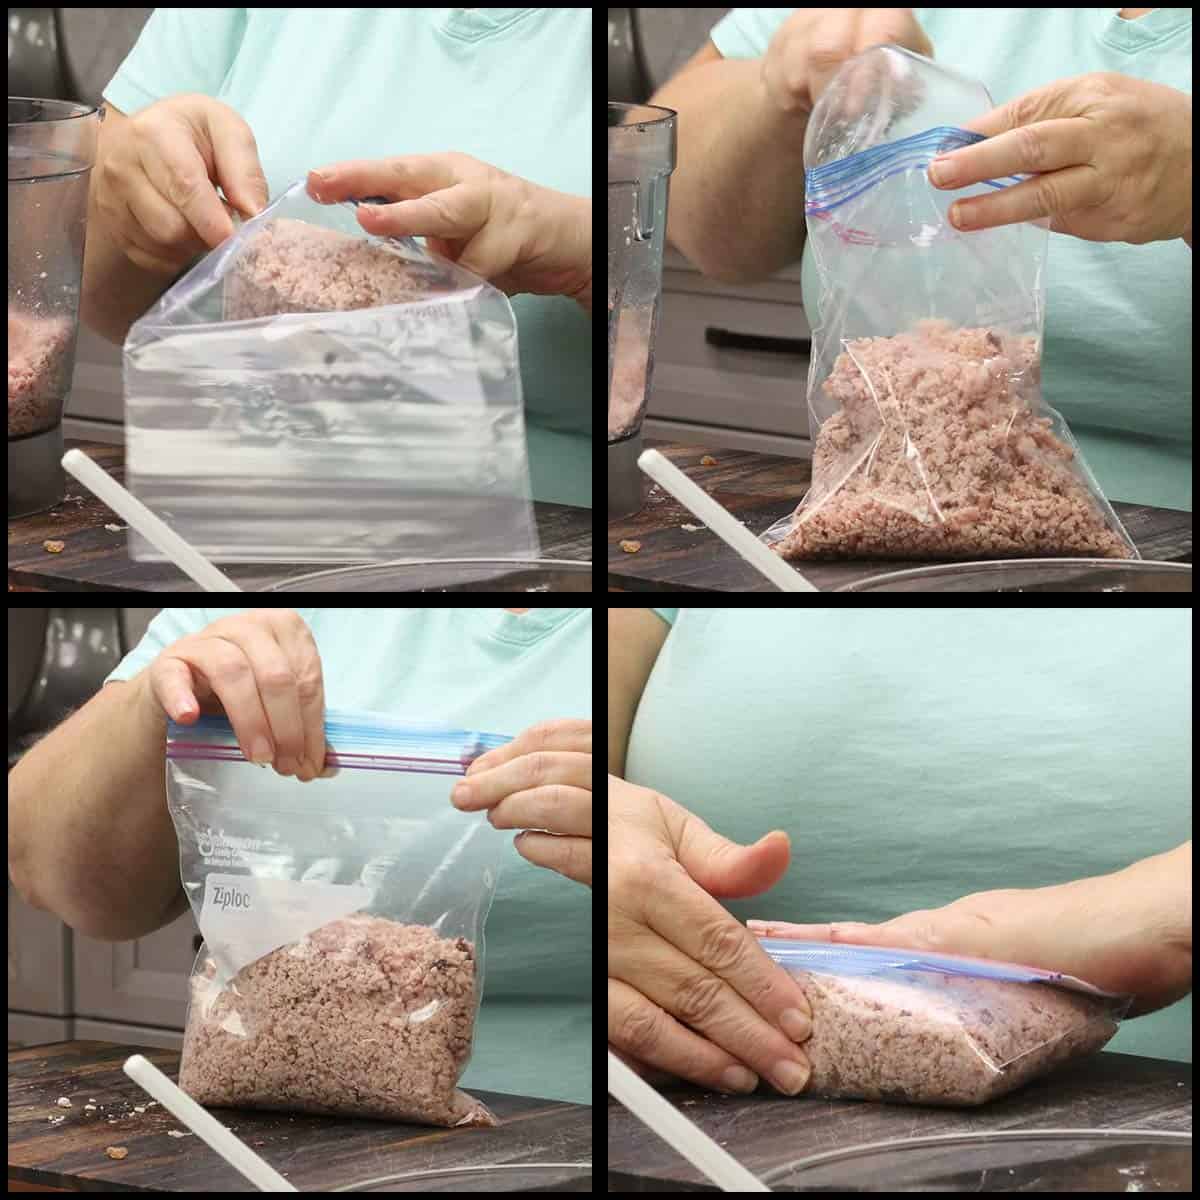 packaging up the chopped ham to freeze.